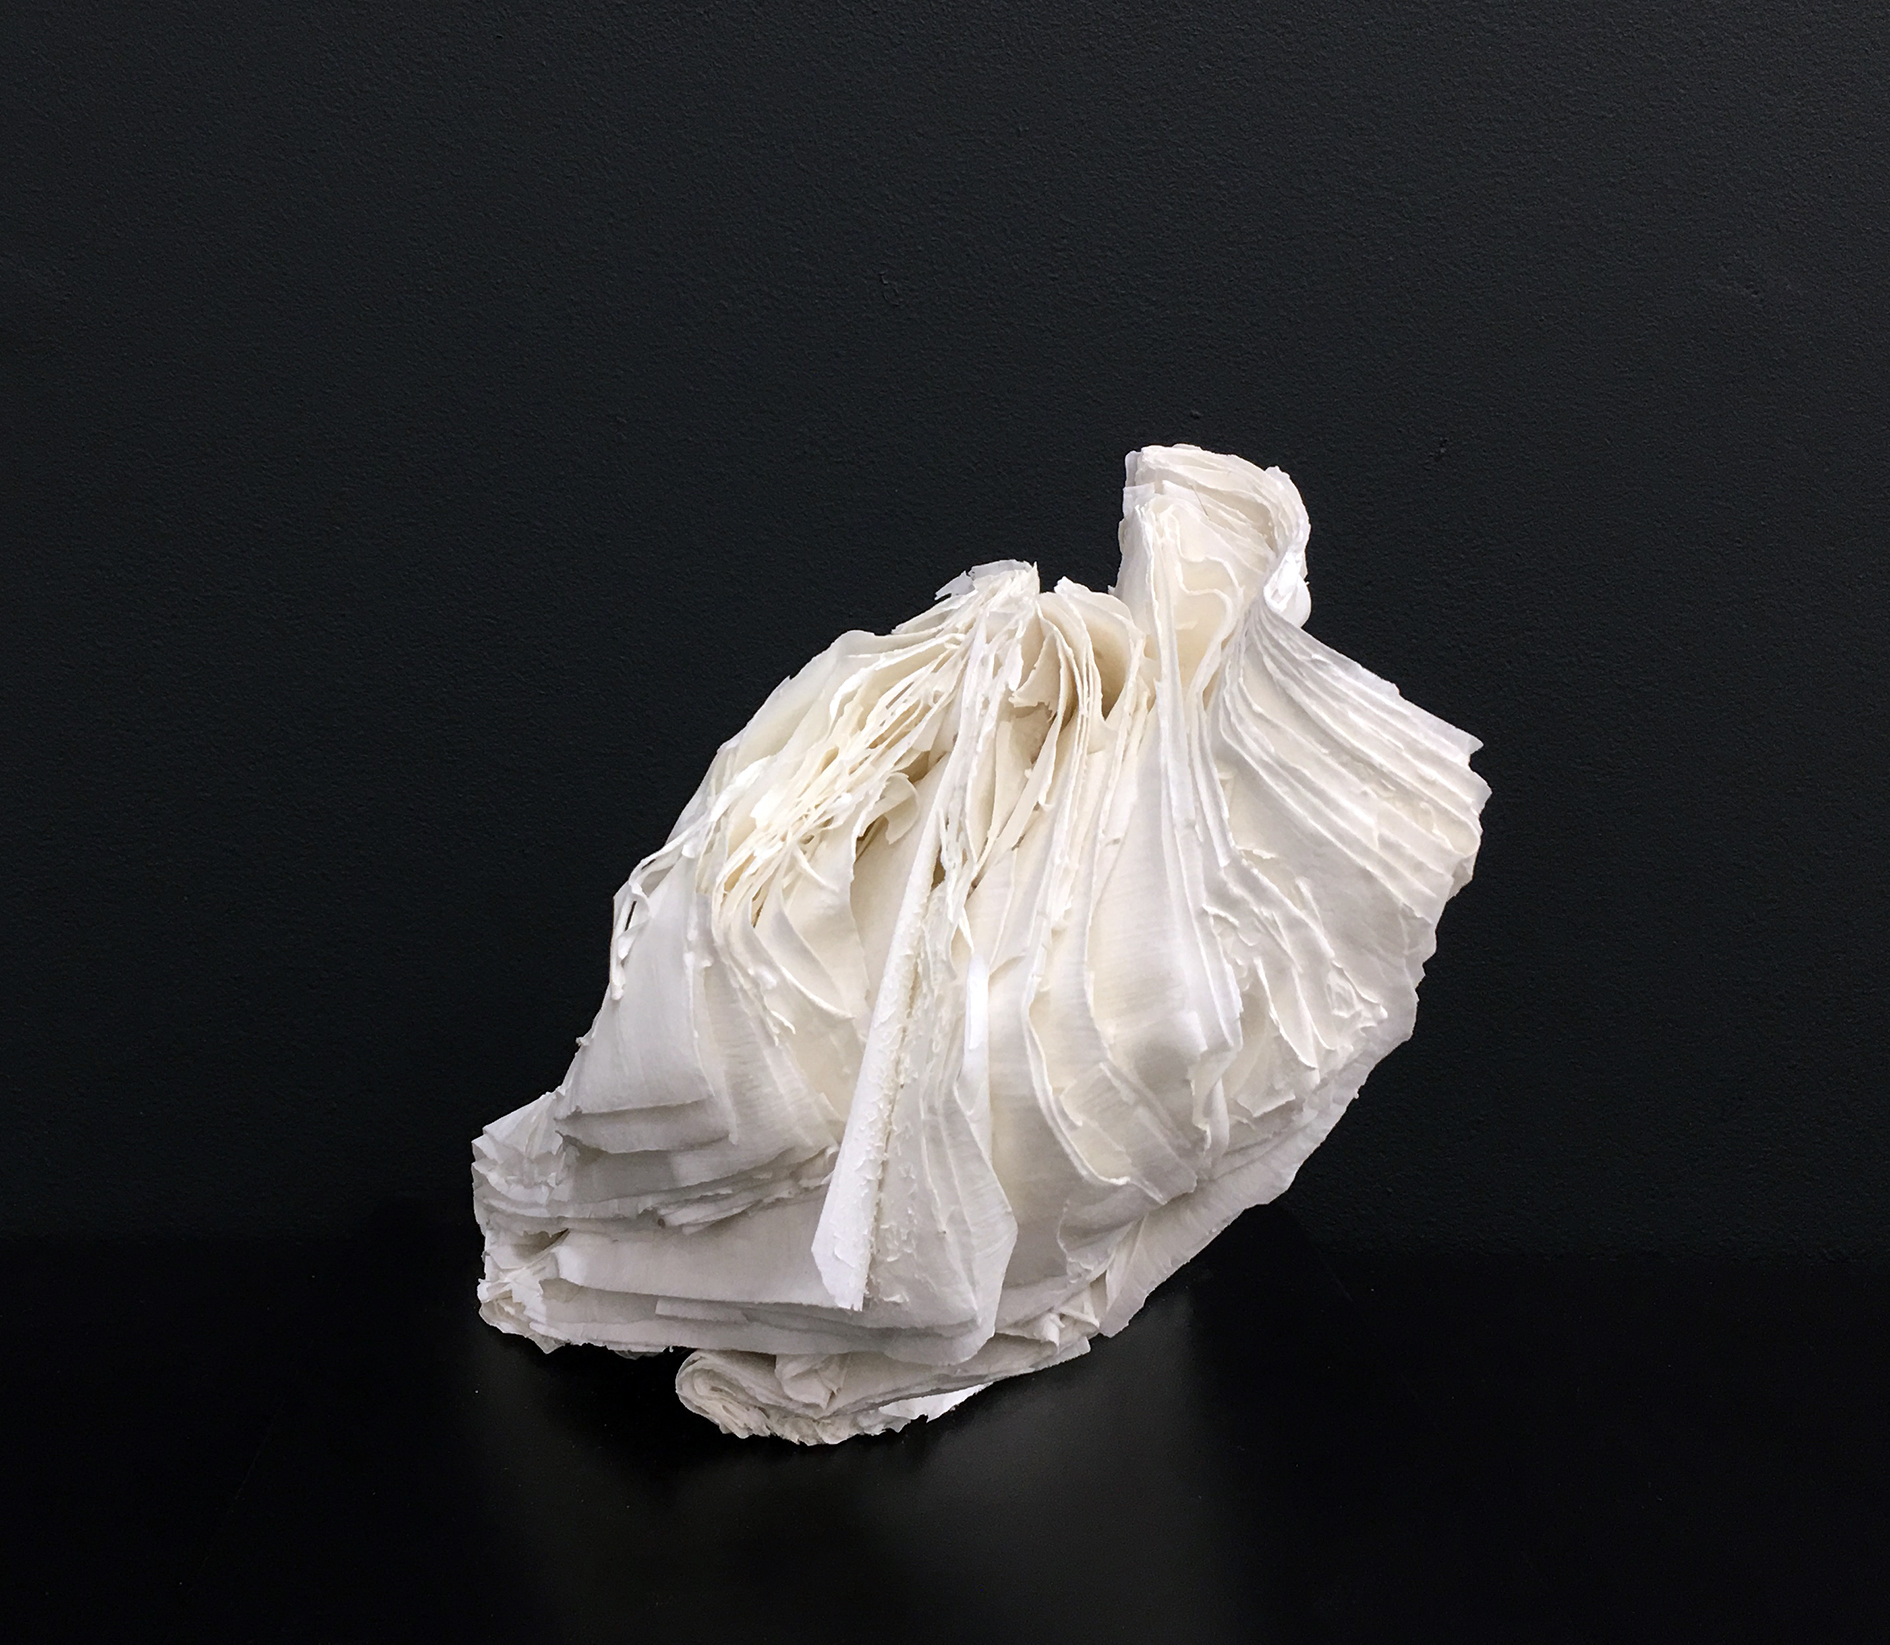   CYRUS TANG   Untitled 2  2016 Porcelain and paper 17 x 18 x 18 cm 